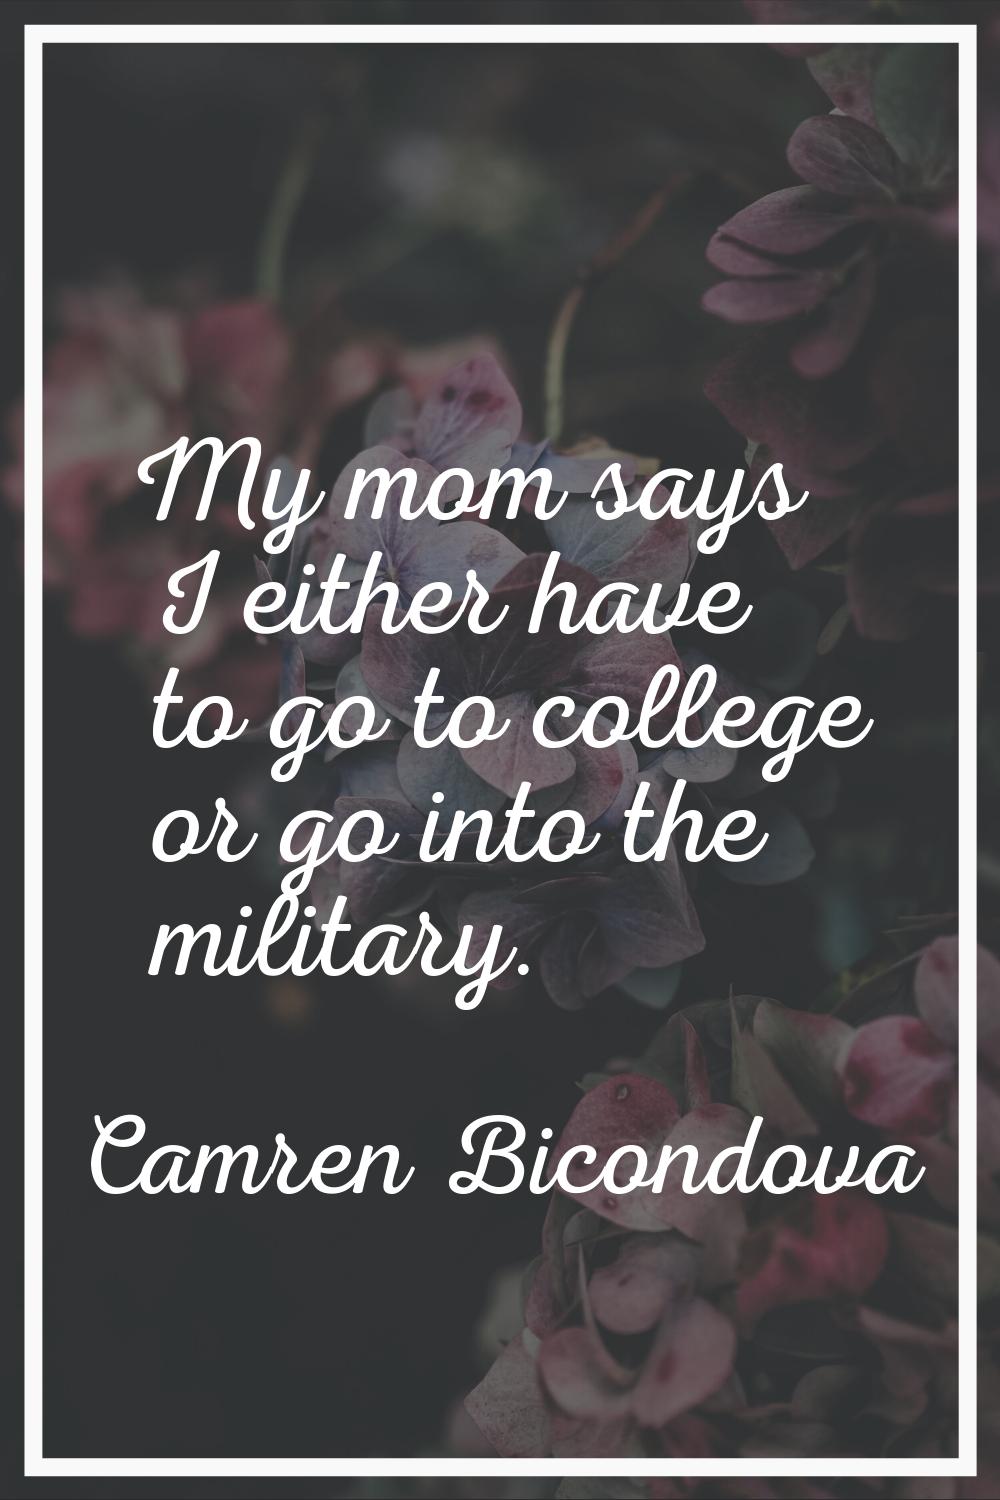 My mom says I either have to go to college or go into the military.